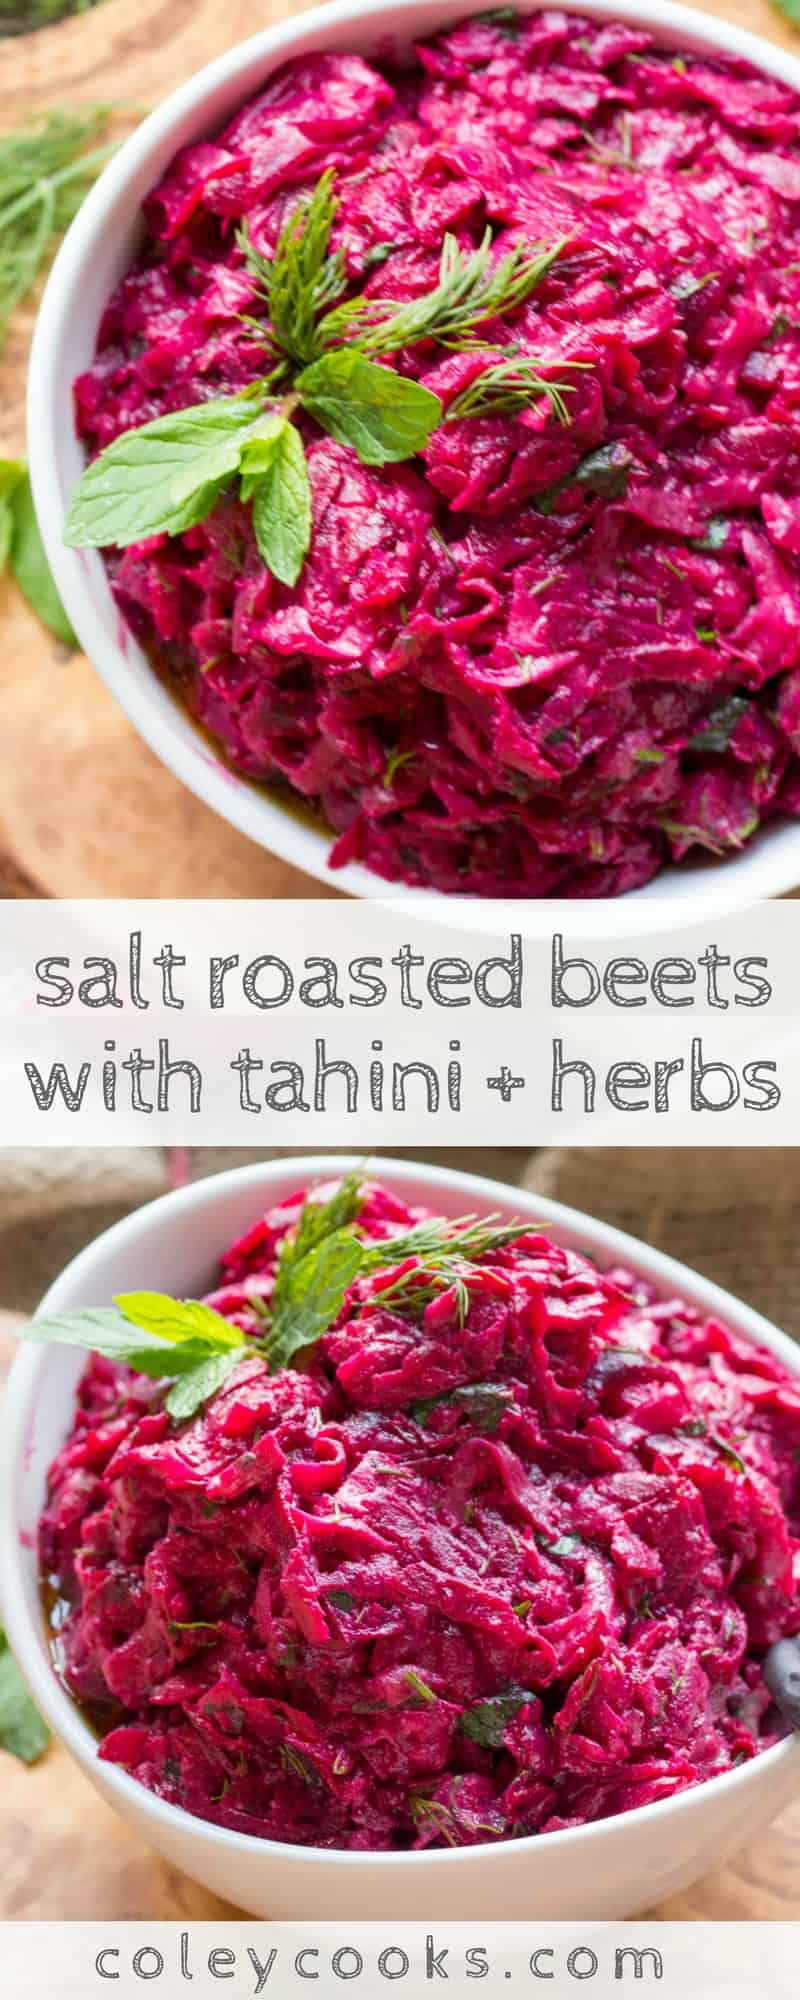 SALT ROSTED BEETS with TAHINI + HERBS | This easy recipe from the Zahav cookbook is vegan, gluten free, paleo and makes the best, most flavorful side dish! #vegan #glutenfree #paleo | ColeyCooks.com